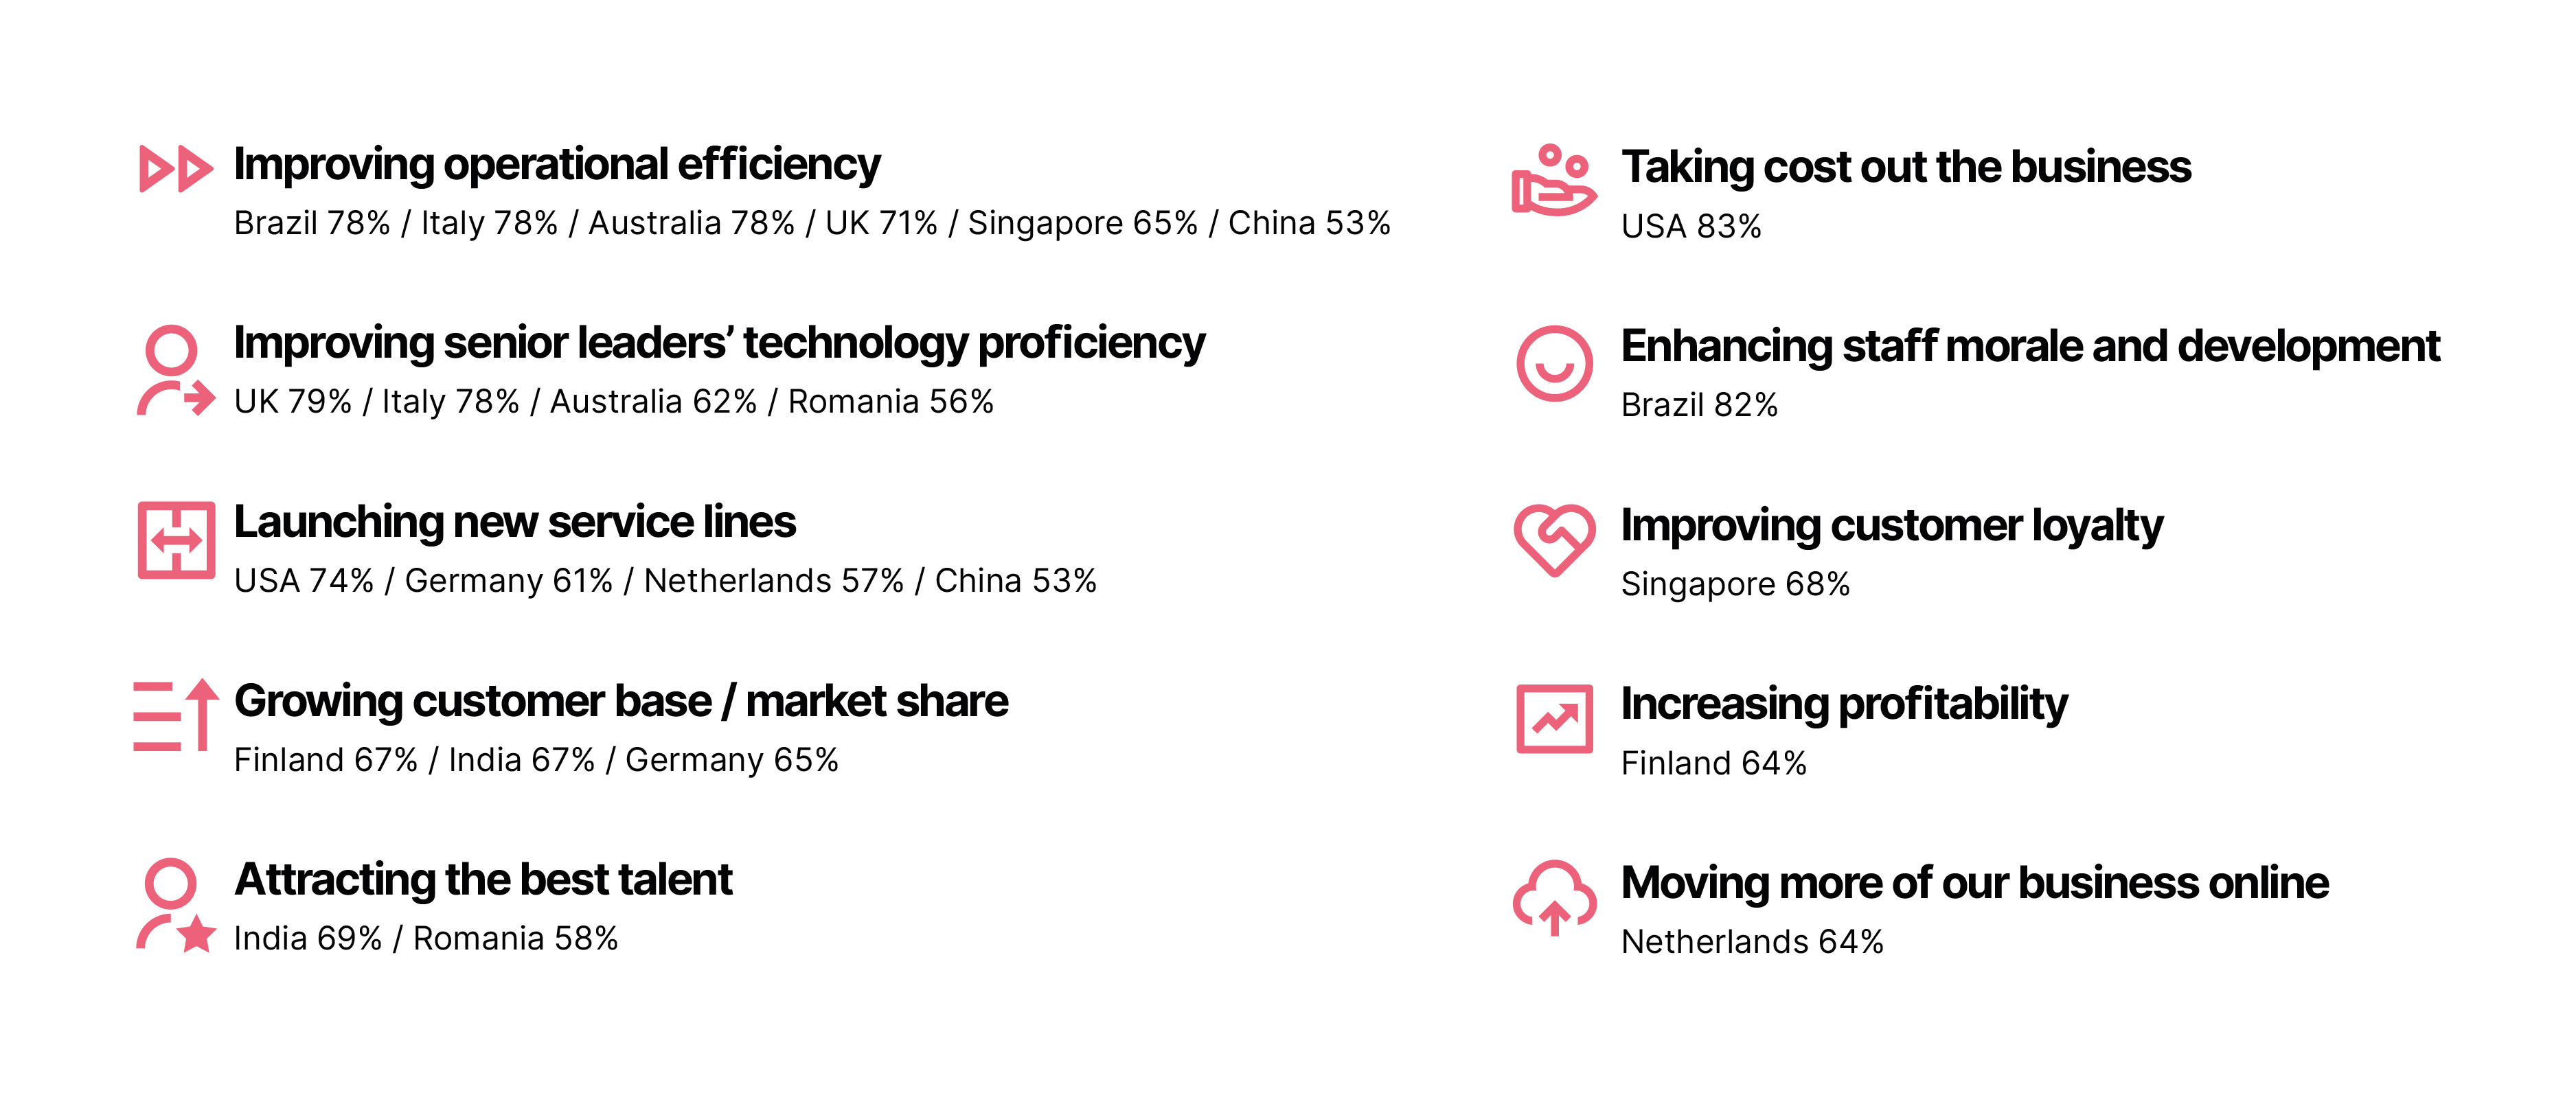 Business priority areas: countries where executives were most likely to say technology had a critical role to play